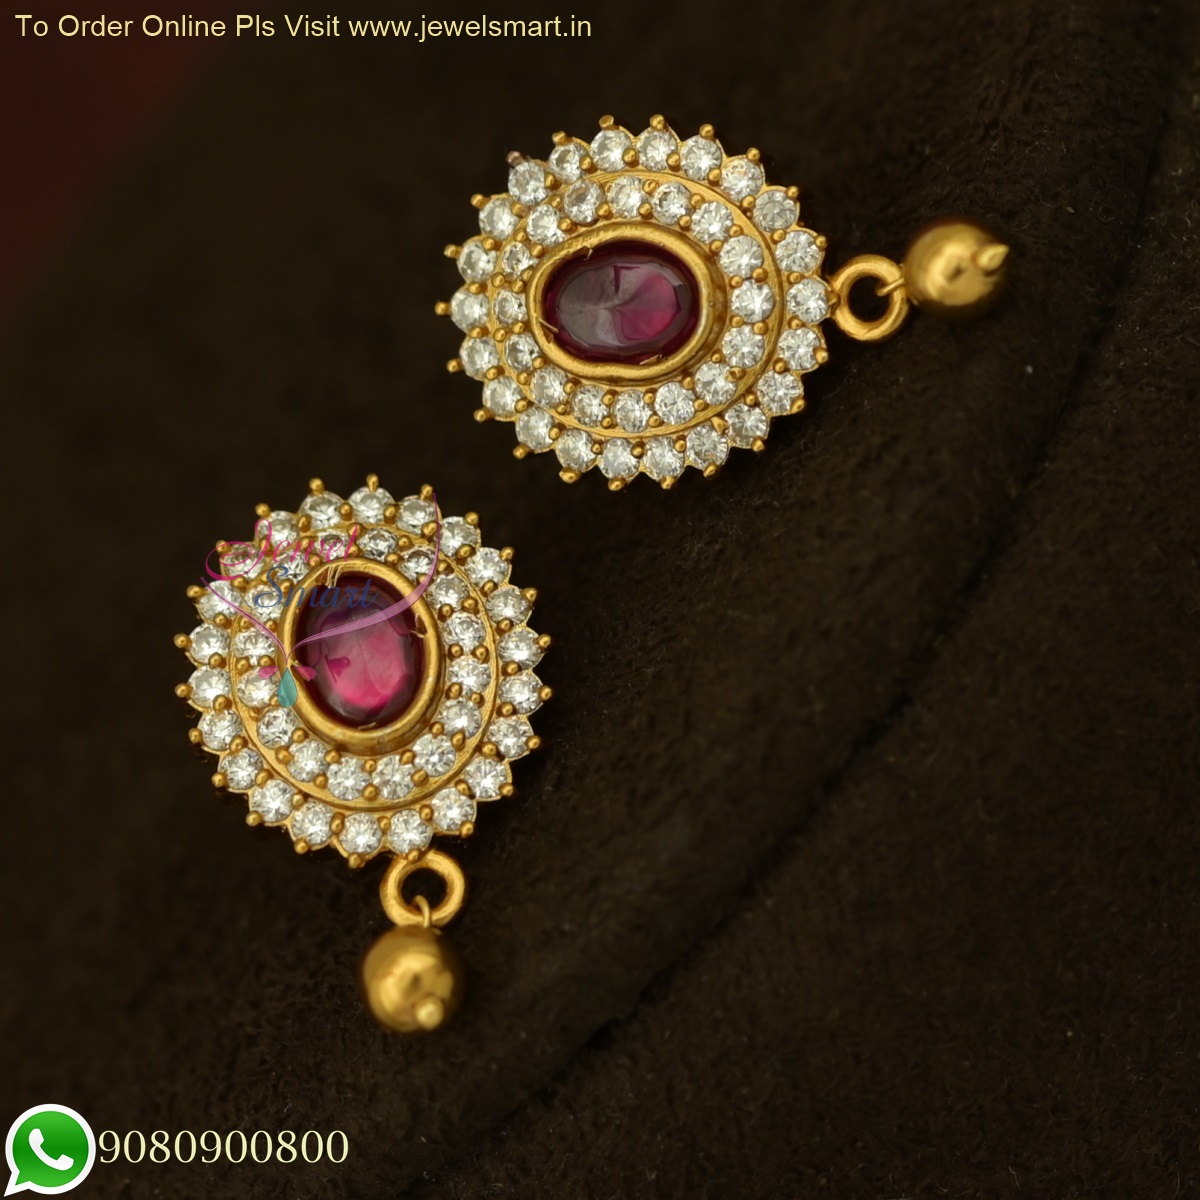 Top Designer Gold Earring Collections Are Here! • South India Jewels